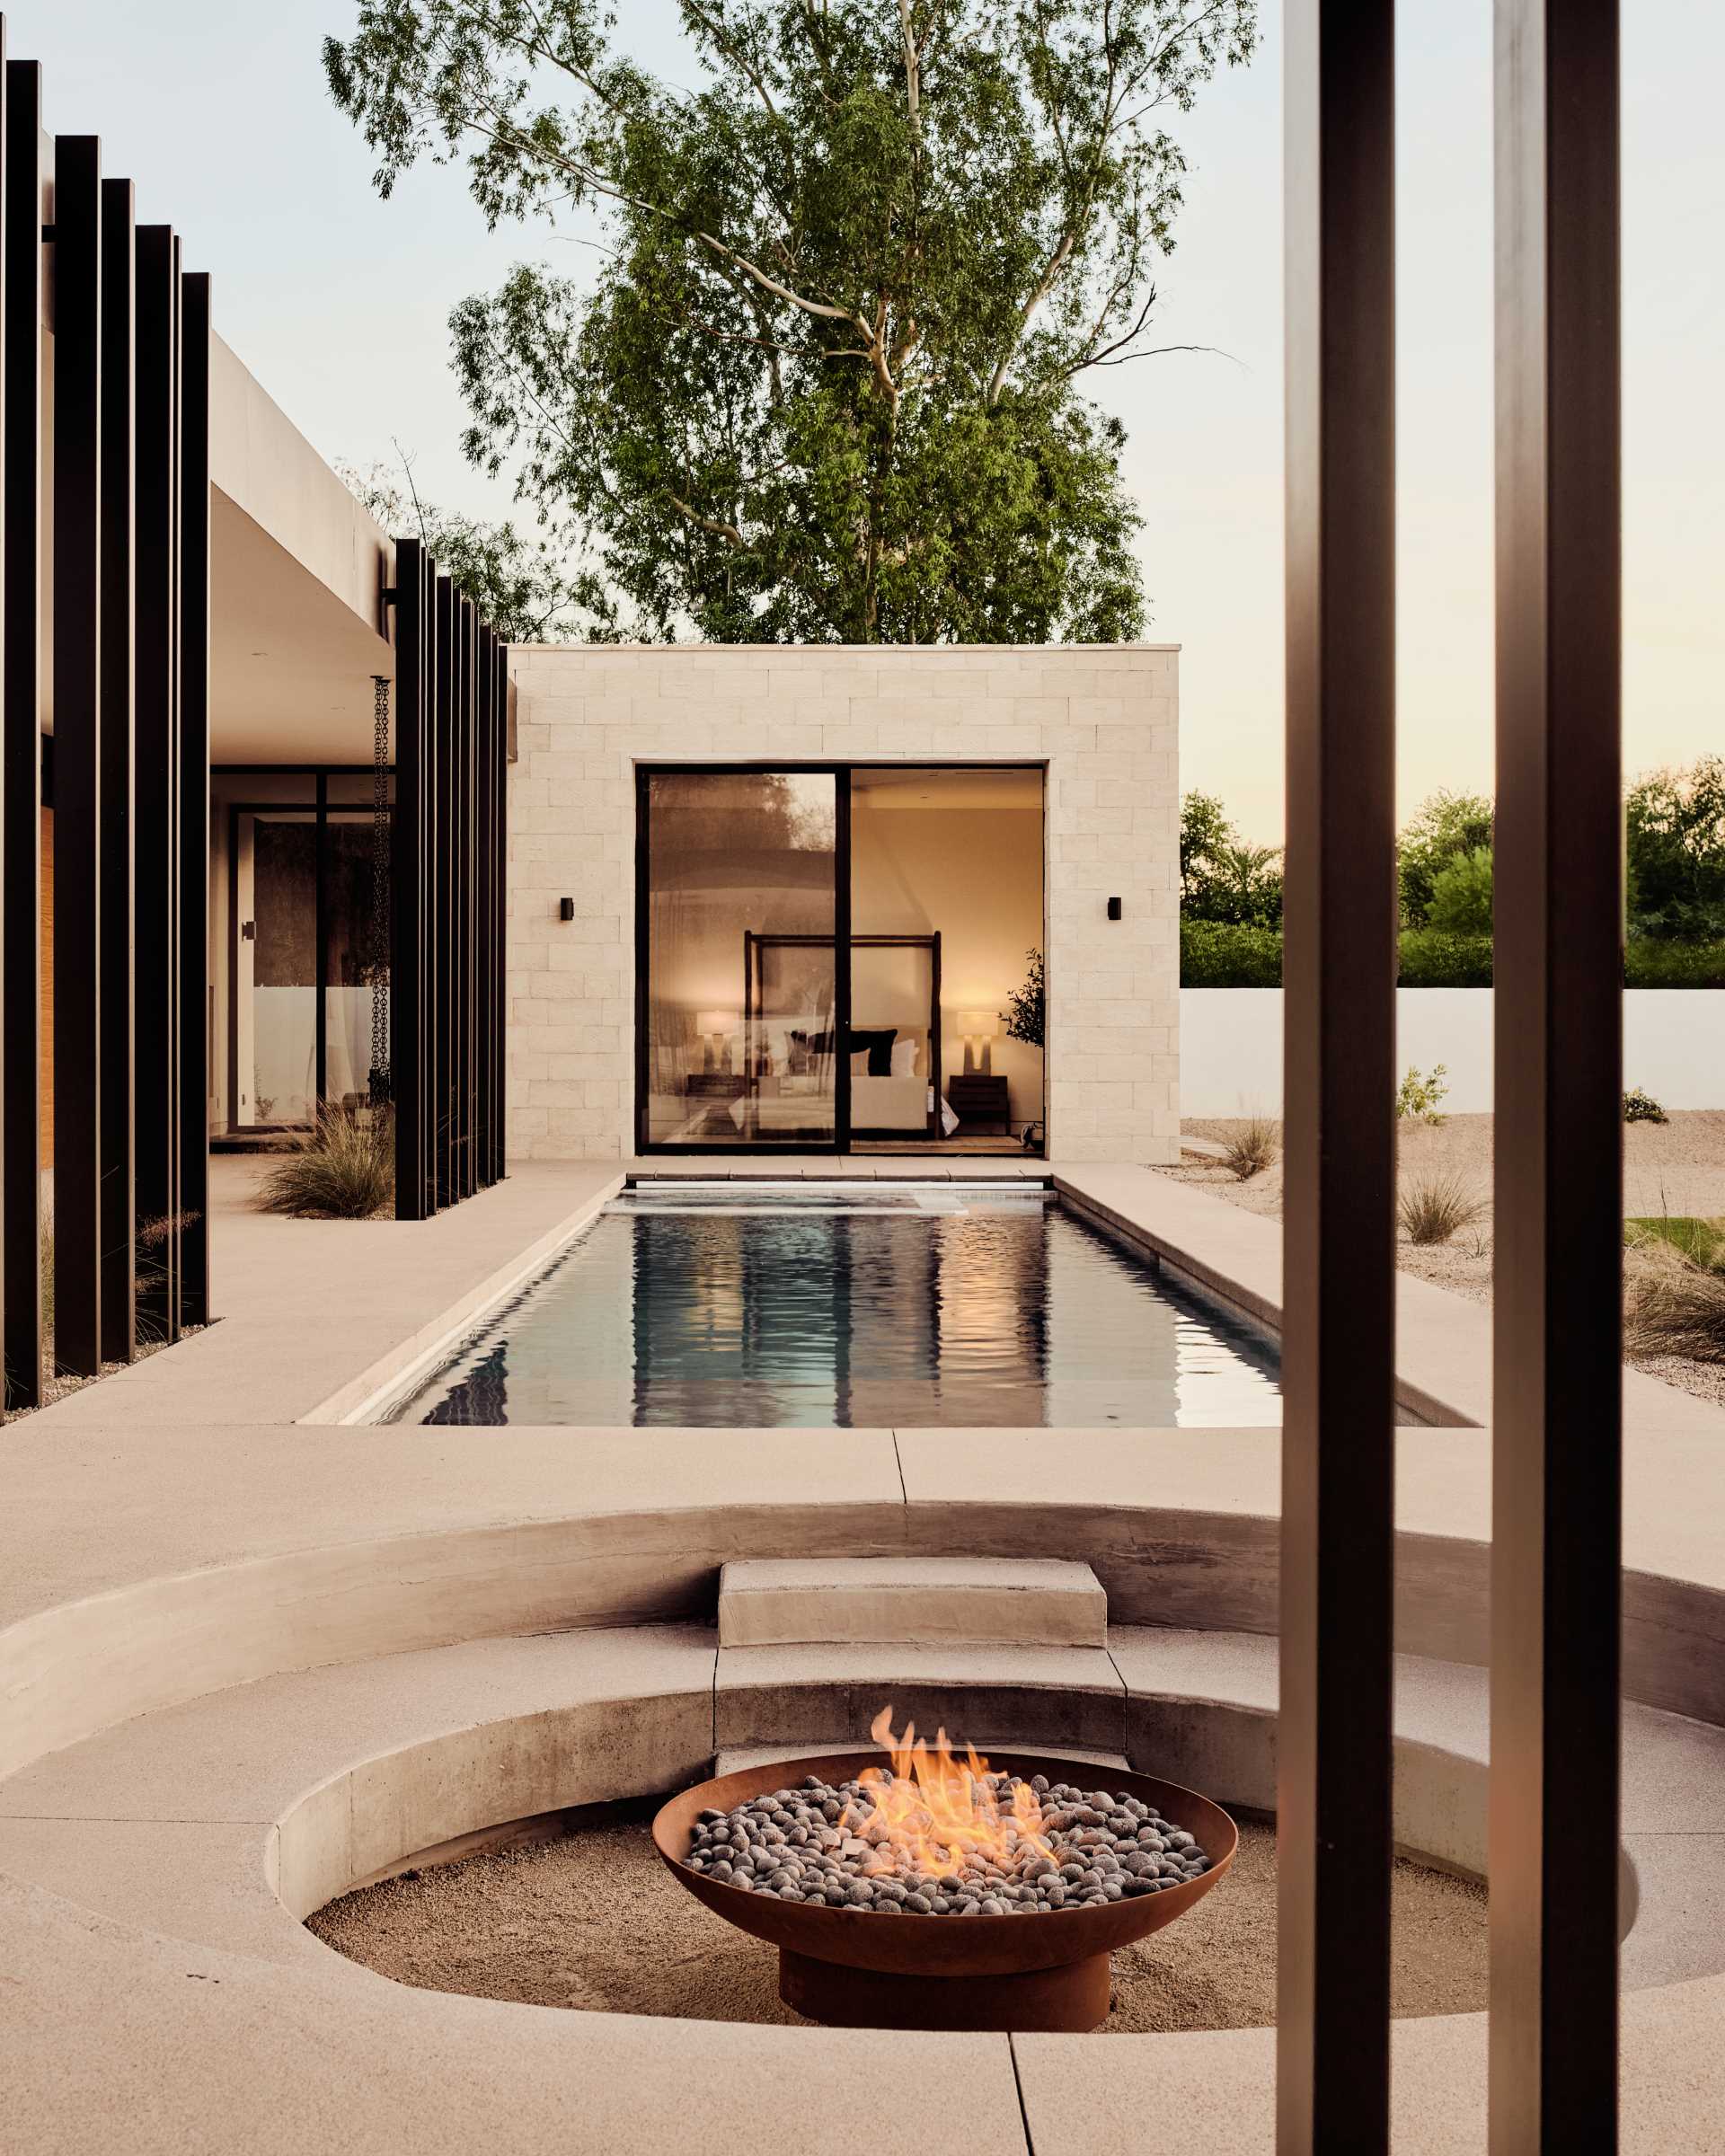 Between the pool and covered patio is a circular sunken fire pit that provides an intimate gathering space.